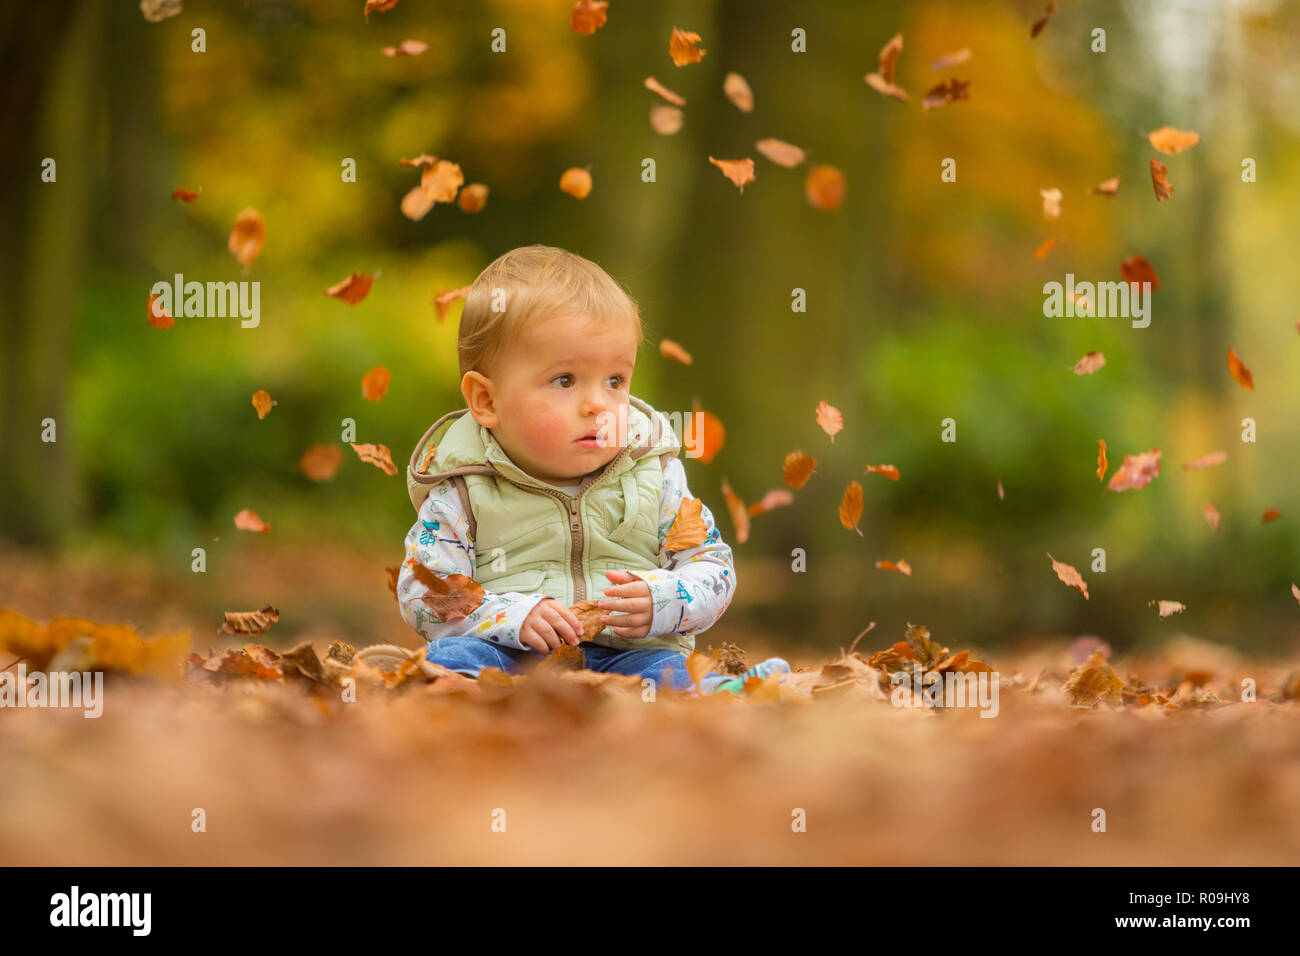 18 month old boy white sitting in autumn leaves with leaves falling Stock Photo